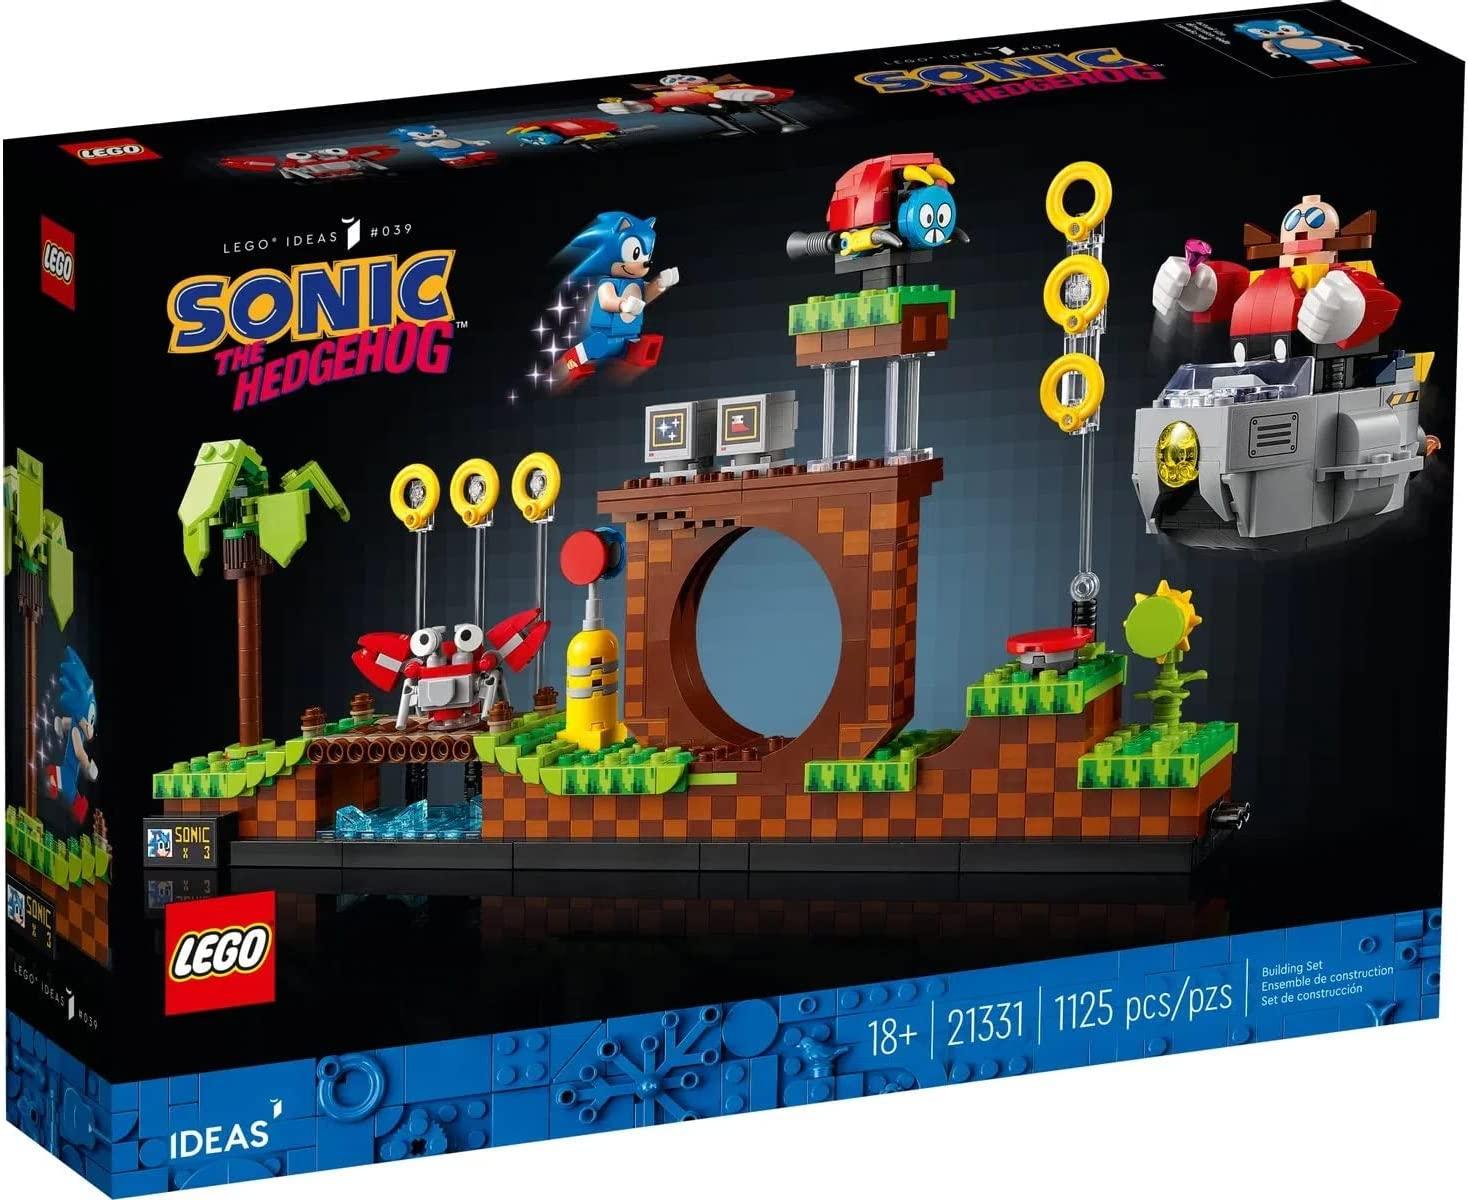 LEGO Ideas Sonic The Hedgehog Green Hill Zone Building Set for $63.99 Shipped